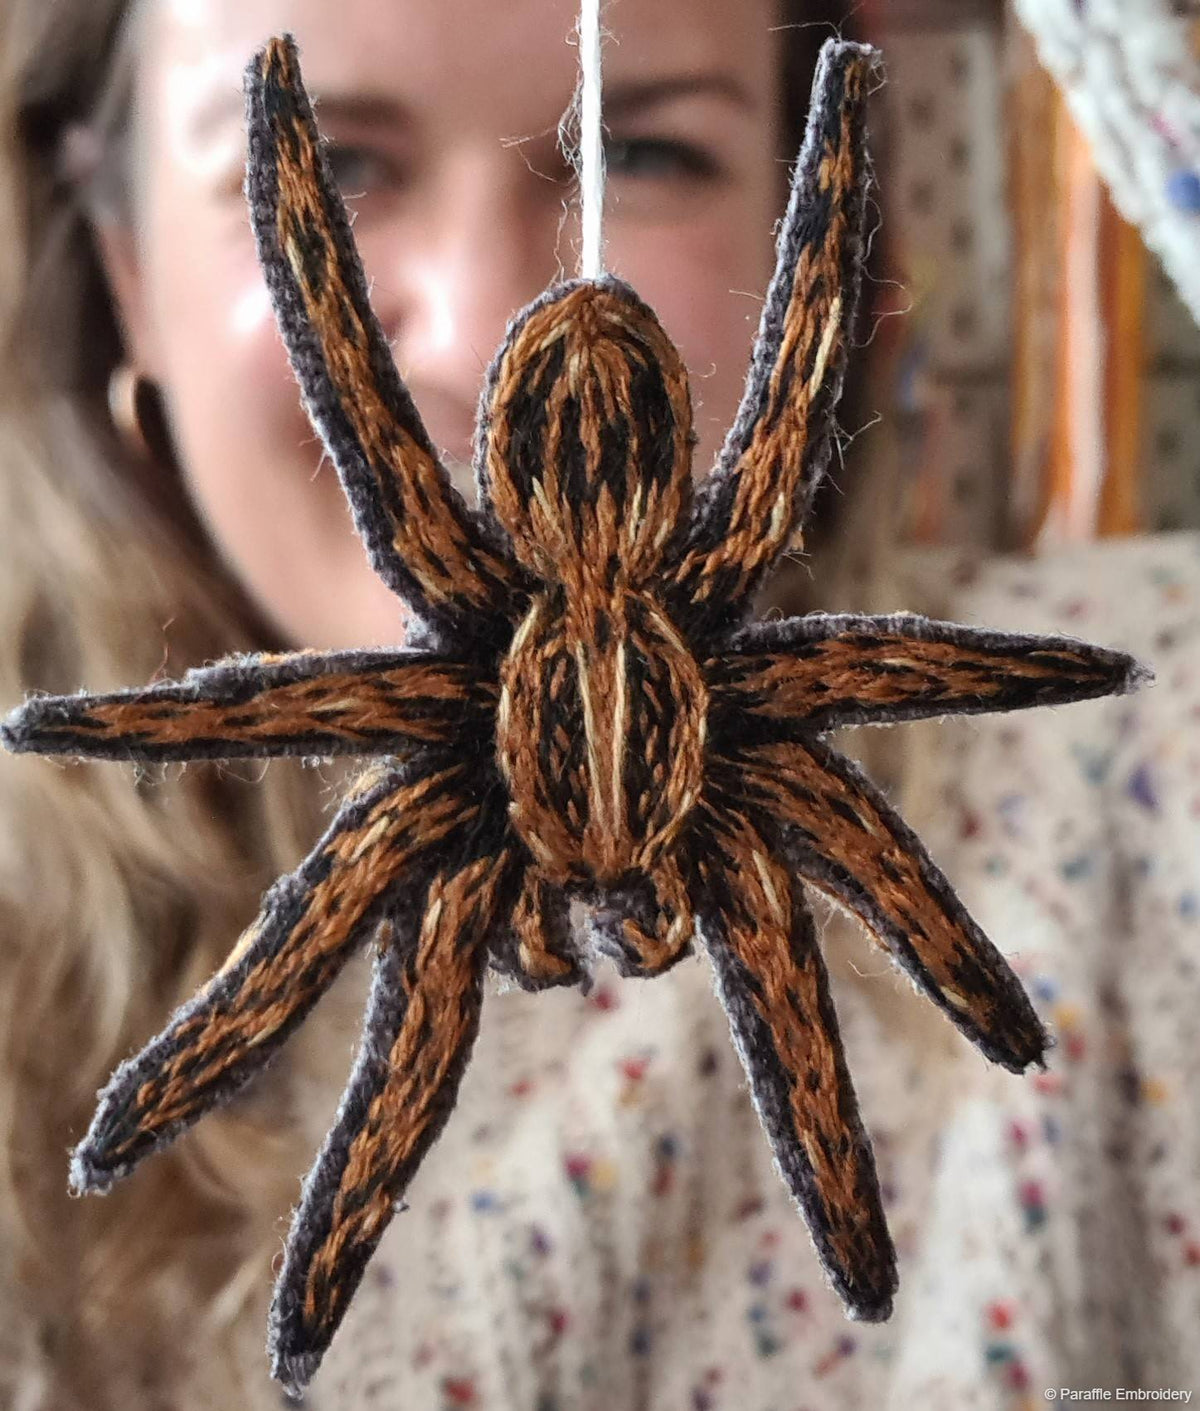 Foreground shows a close up view of an embroidered brown spider, hanging from a white thread. Background shows a partial view of Sammy&#39;s face smiling from behind the spider.